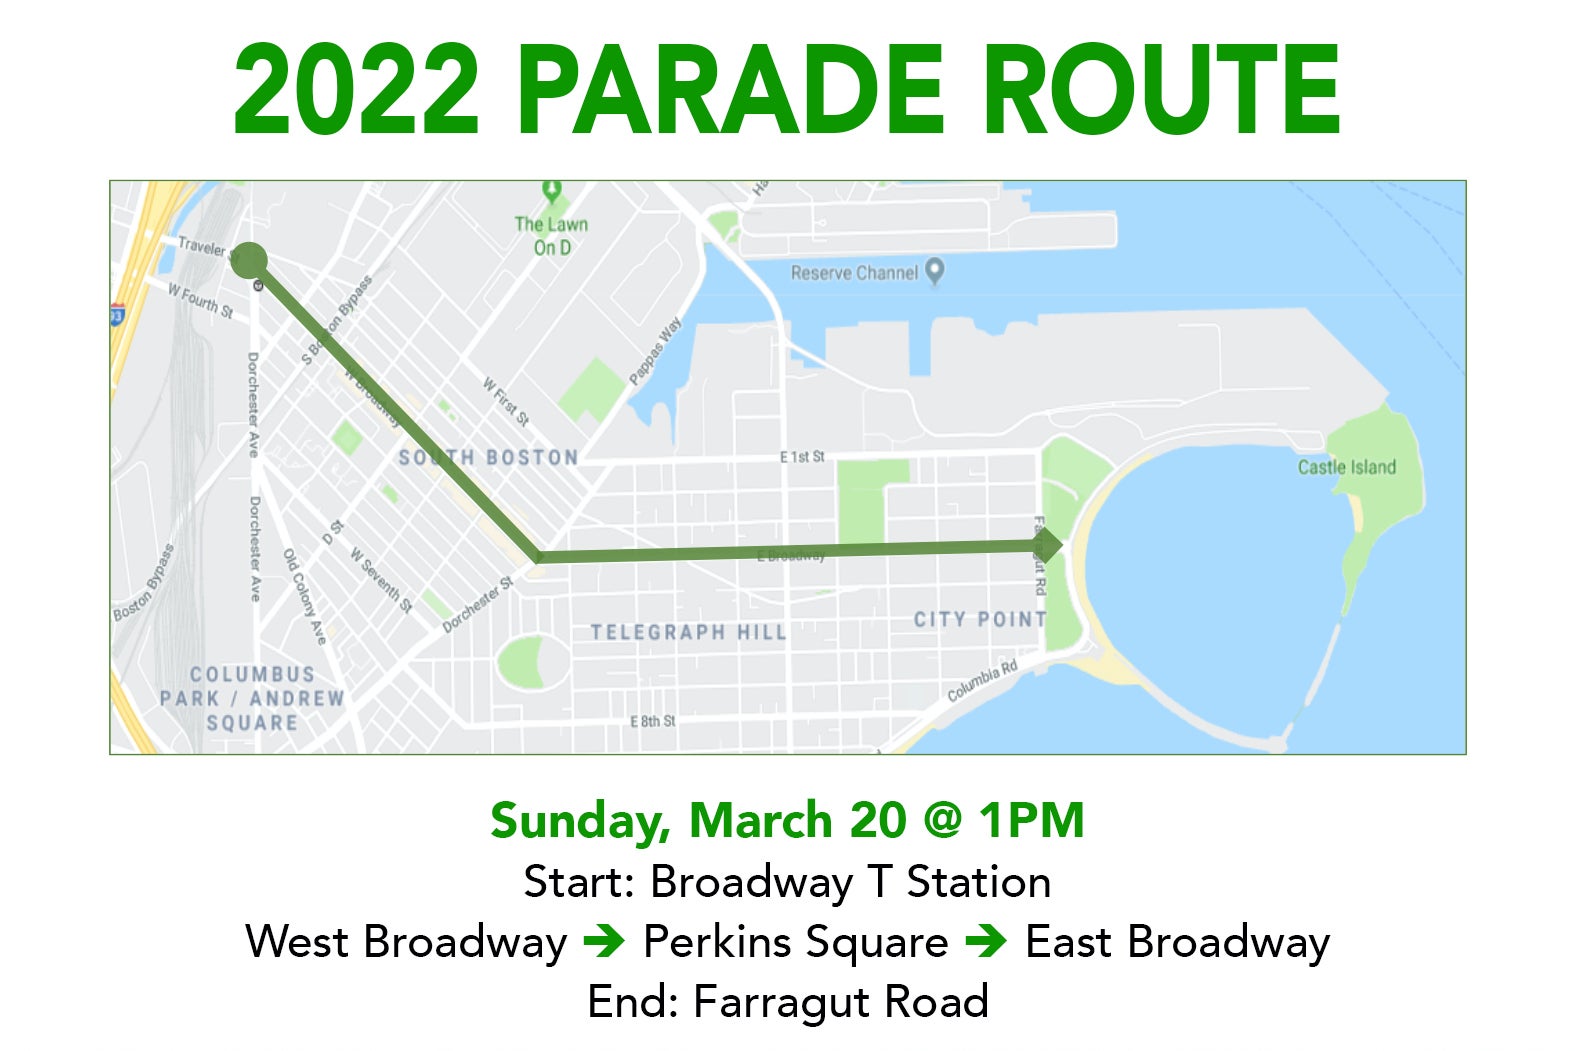 The parade route for the 2022 Boston St. Patrick's Day Parade.